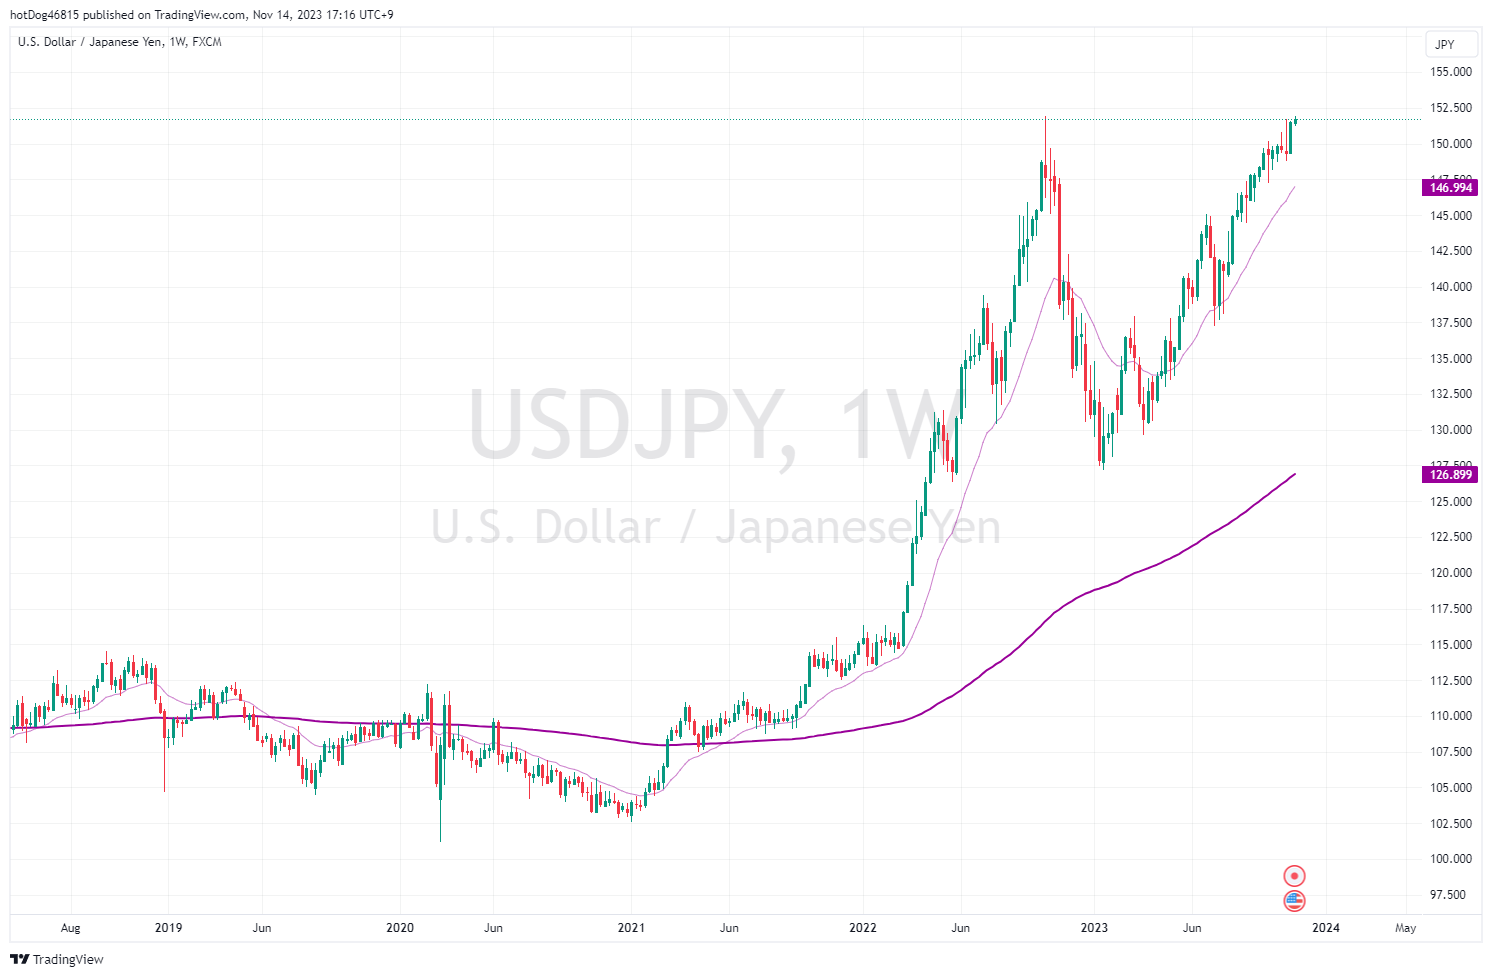 USDJPY 1W chart&nbsp;from 2019 to 2023